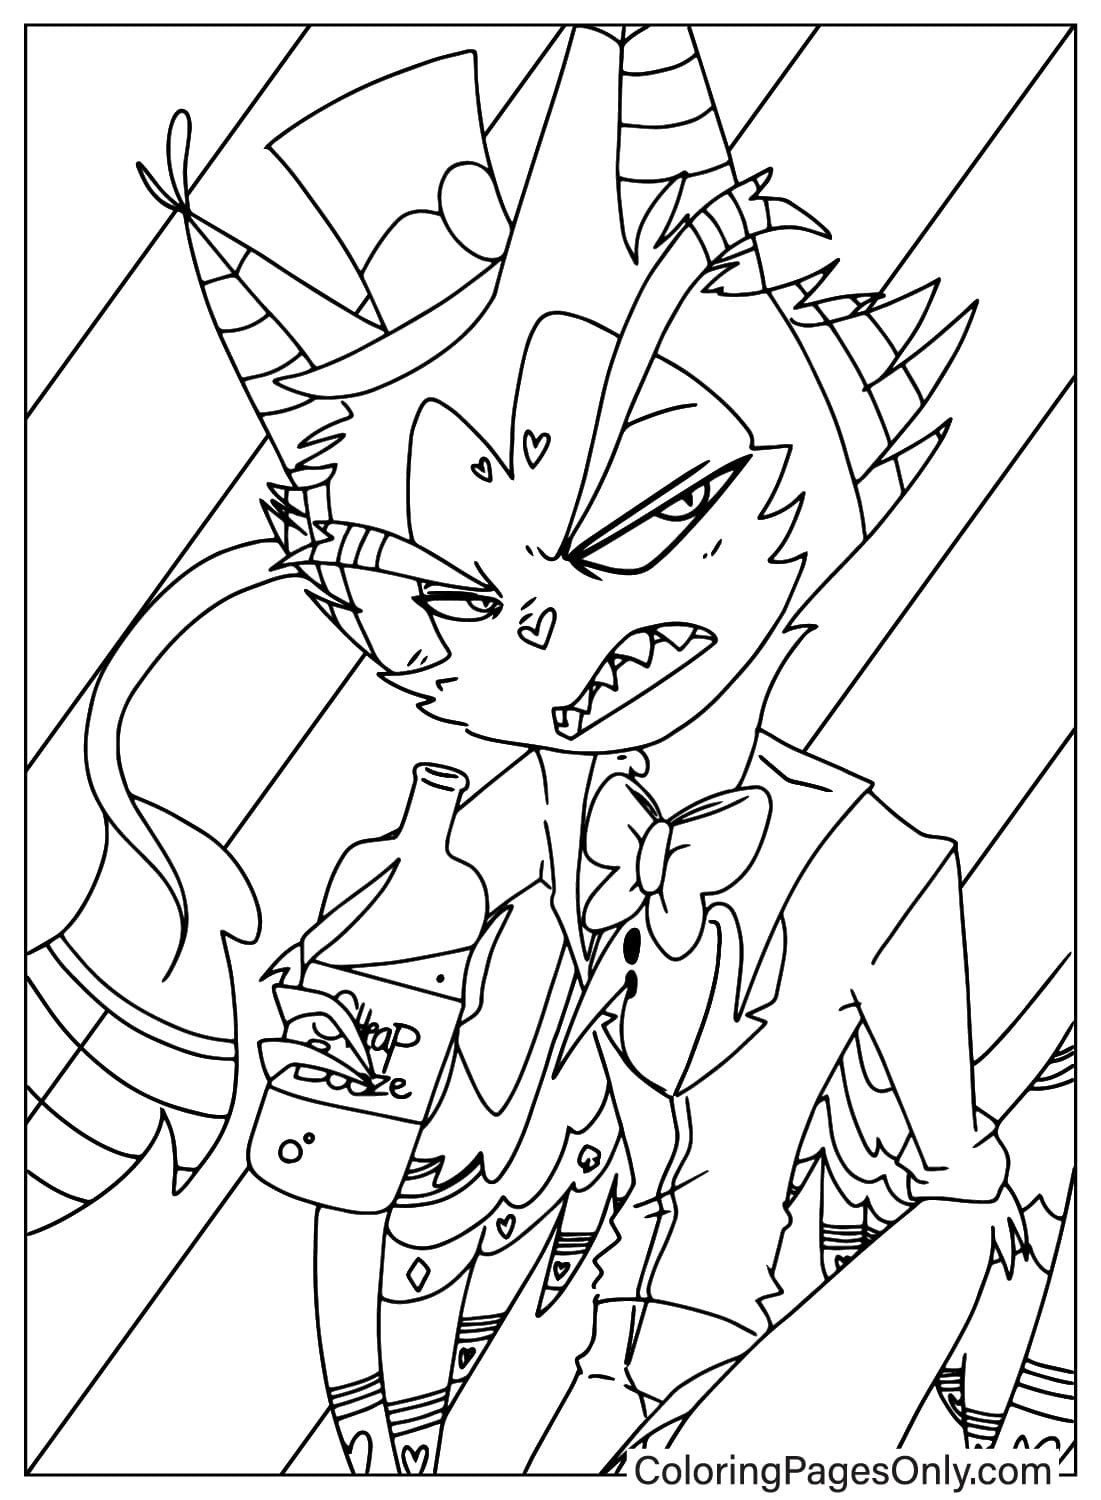 Print Husk Coloring Page from Husk